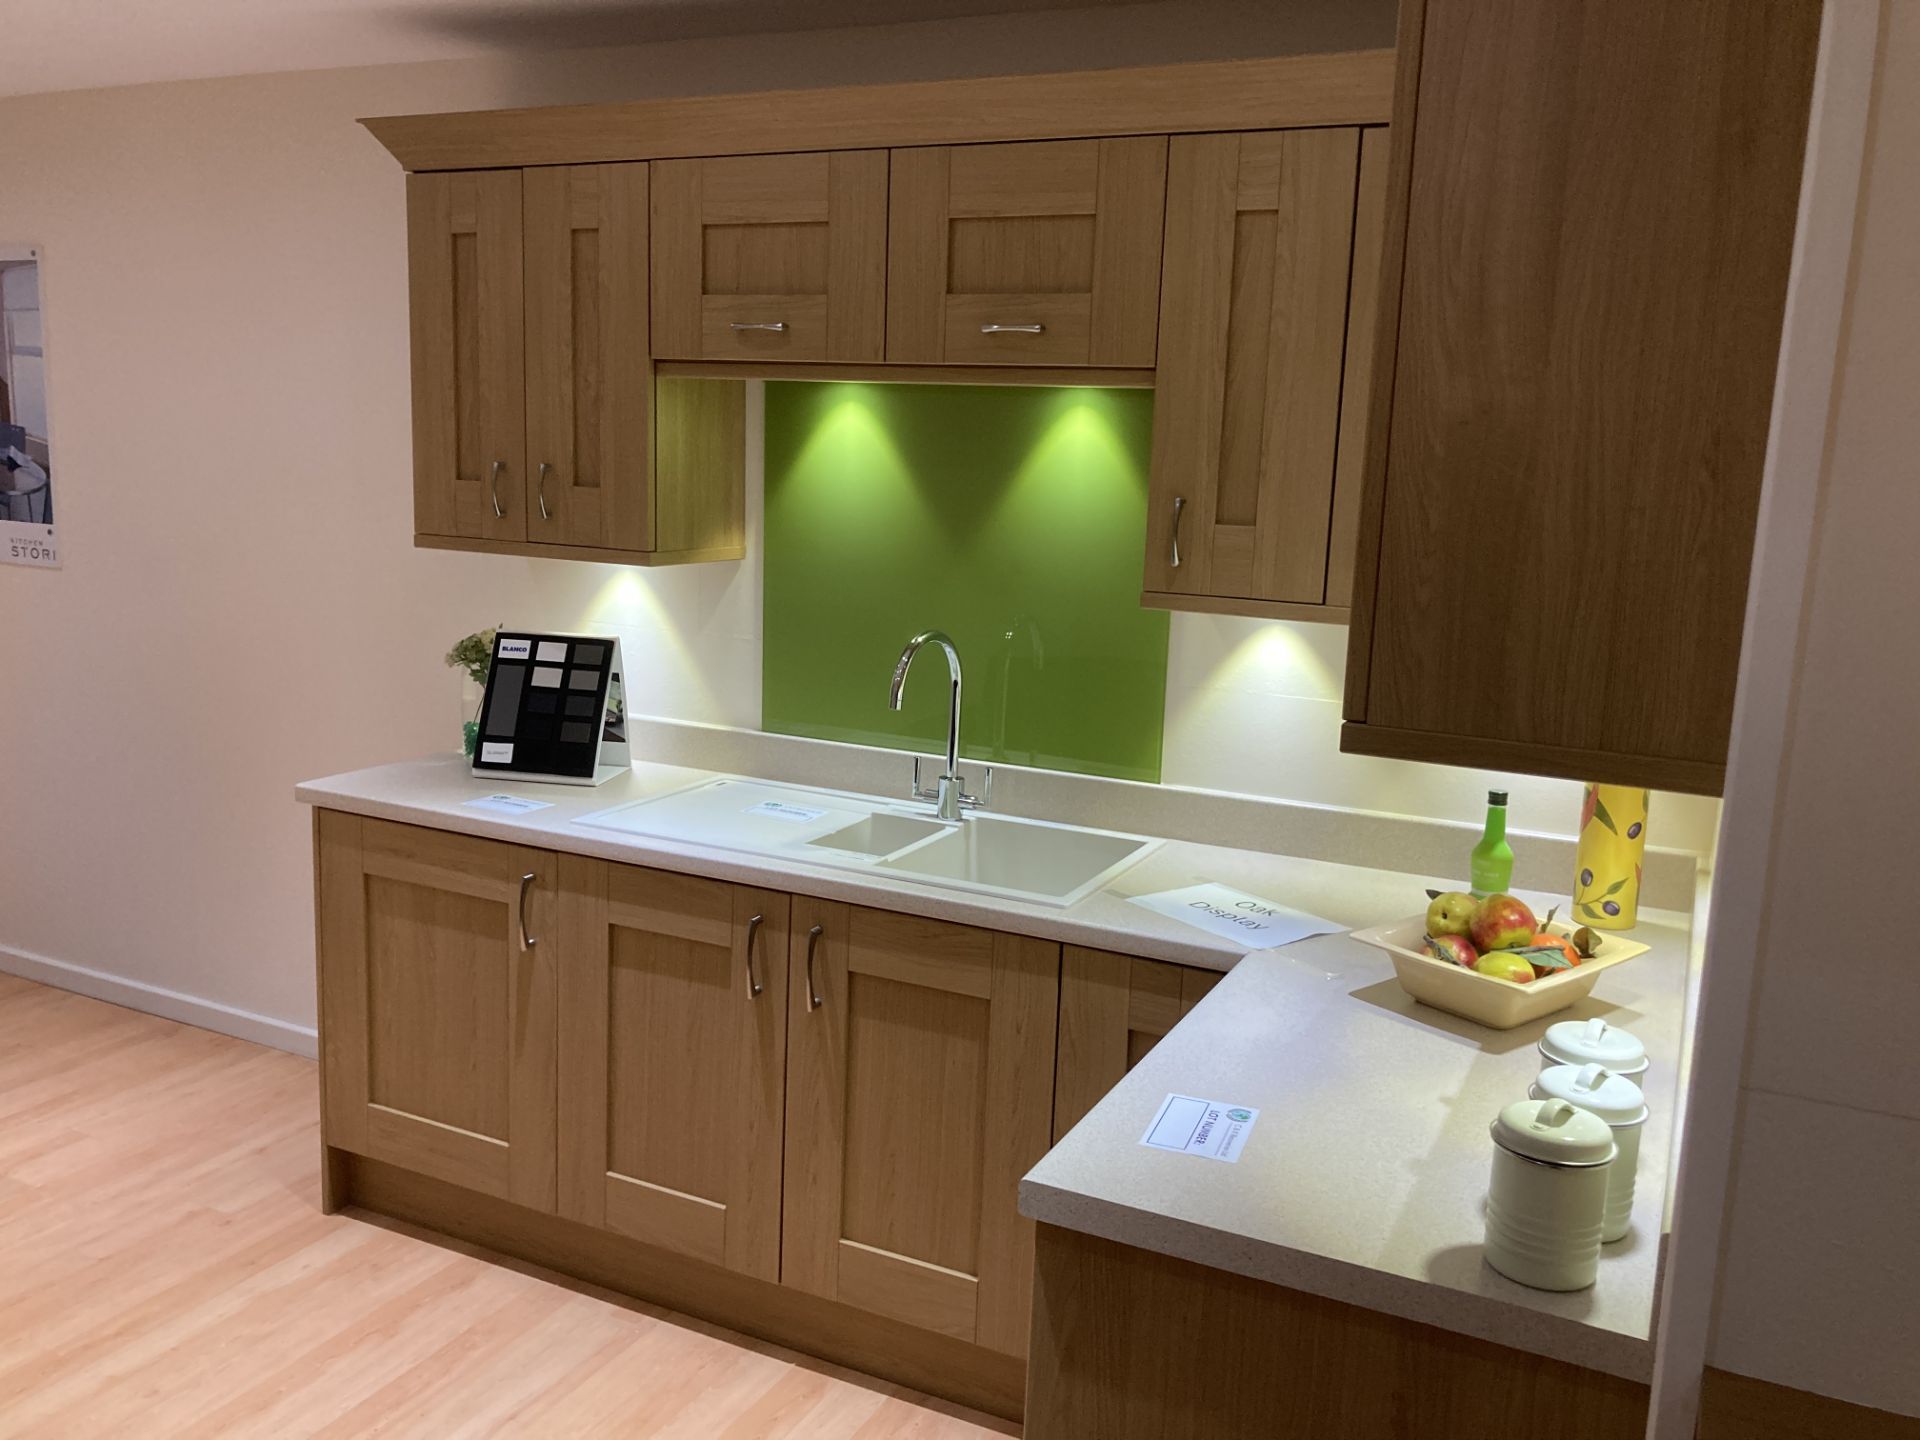 Oak display kitchen with Blanco double sink and tap - Image 8 of 8